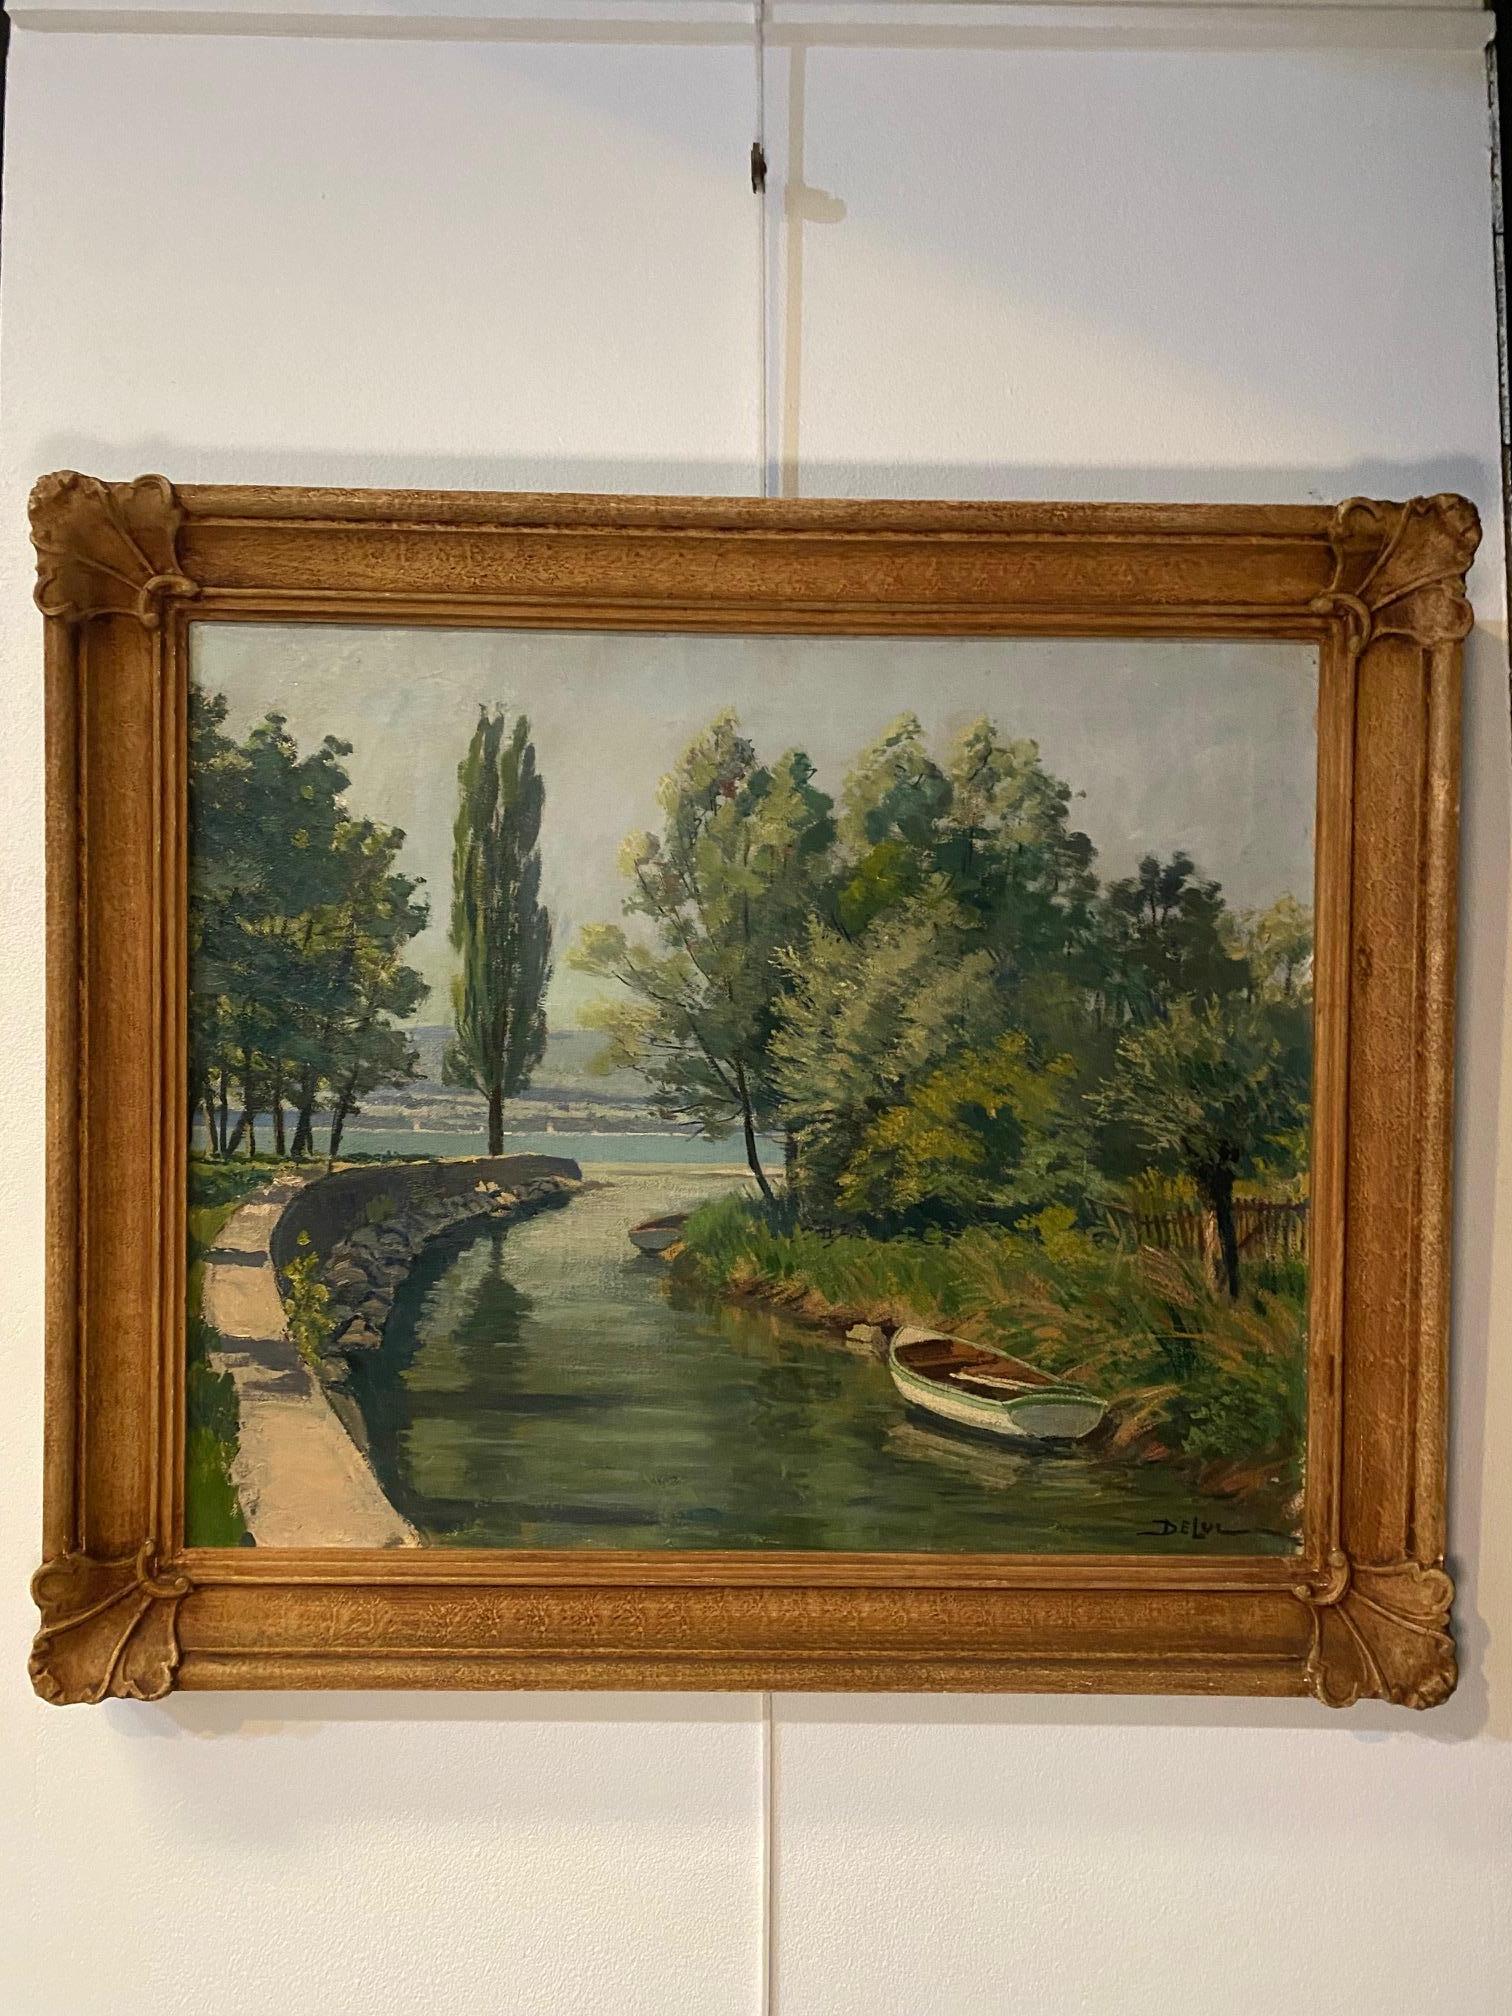 Mouth of Hermance by John Henri Deluc - Oil on canvas 50x61 cm For Sale 1